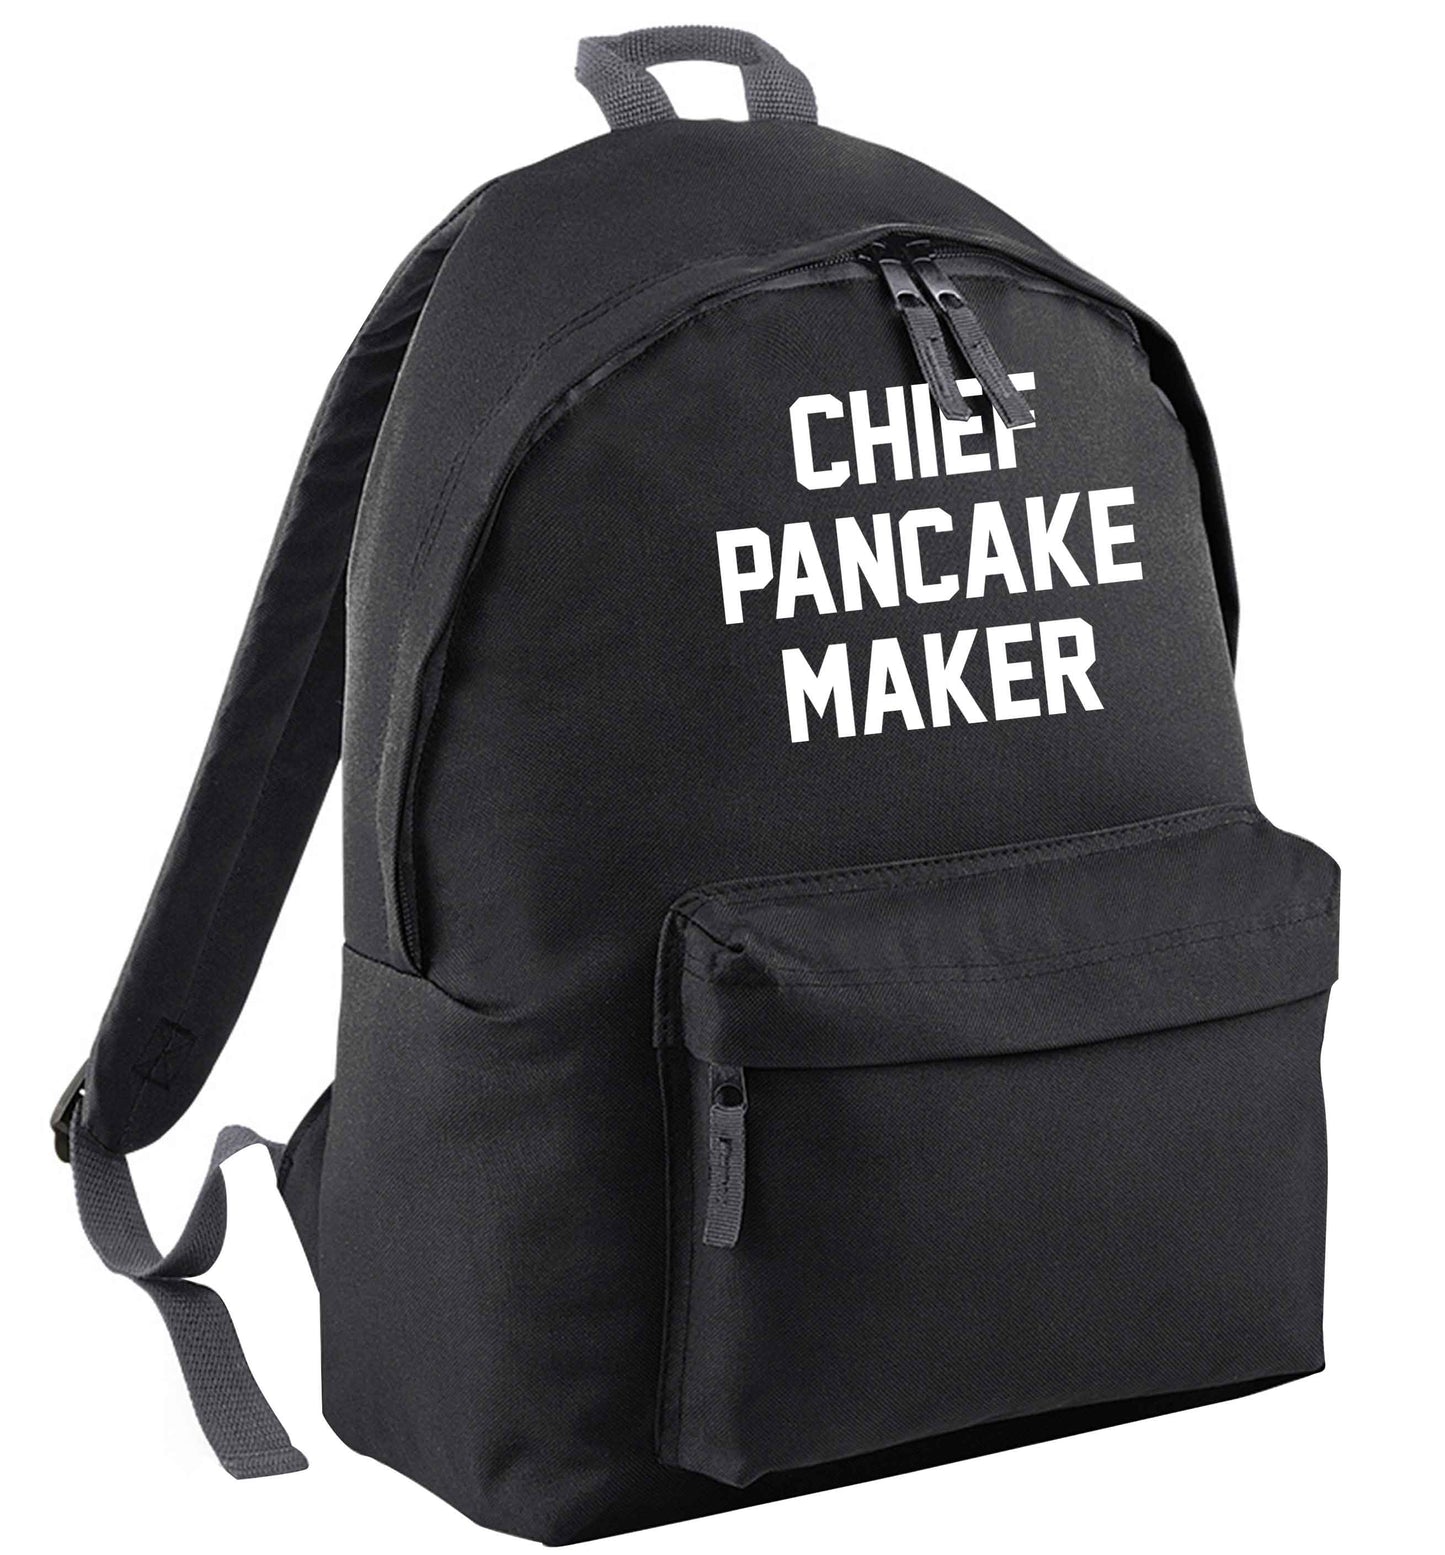 Chief pancake maker | Adults backpack